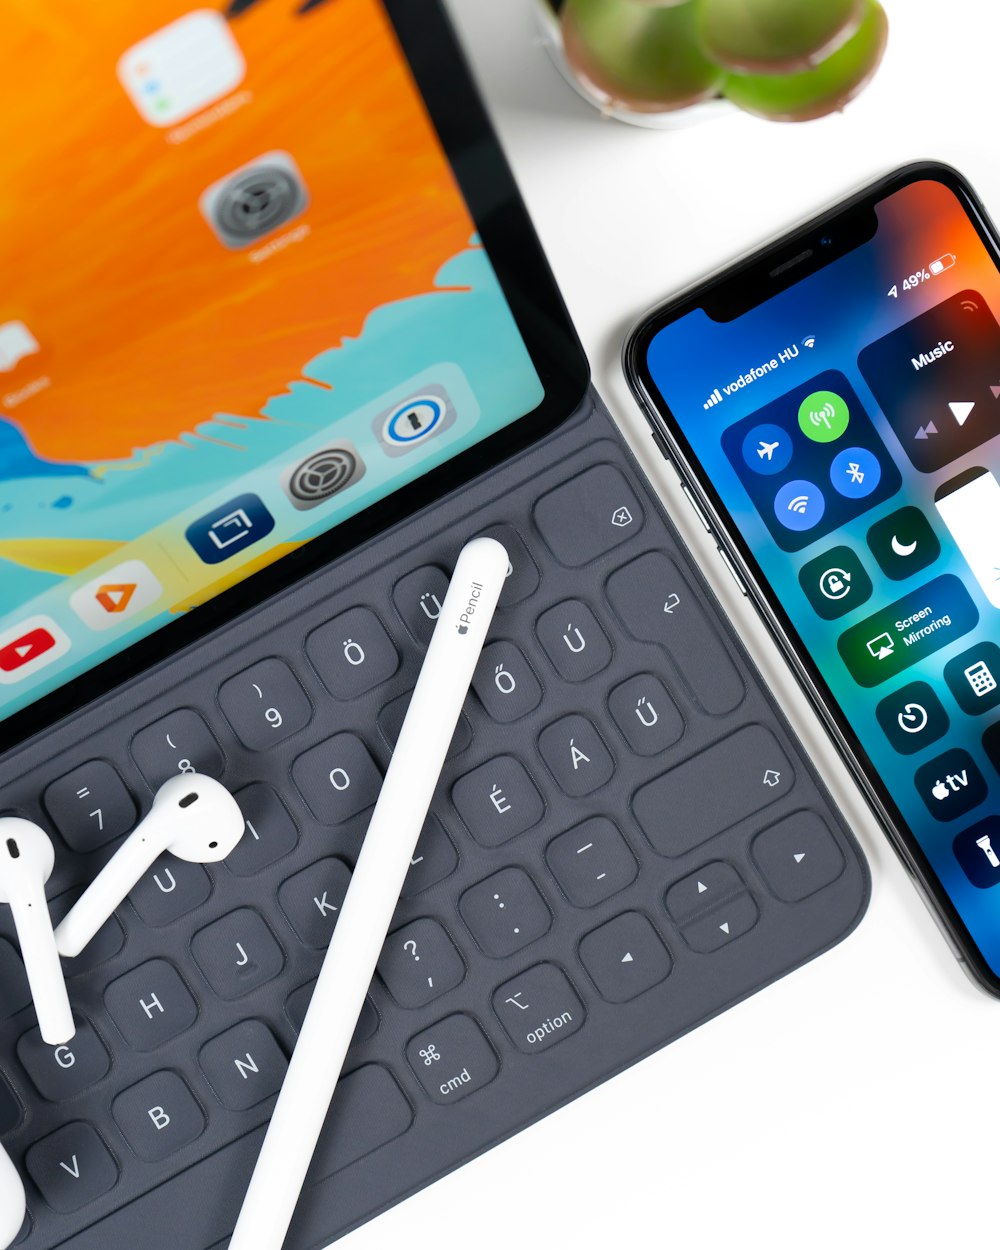 iPad with keyboard, white stylus, white AirPods; and an iphone on table